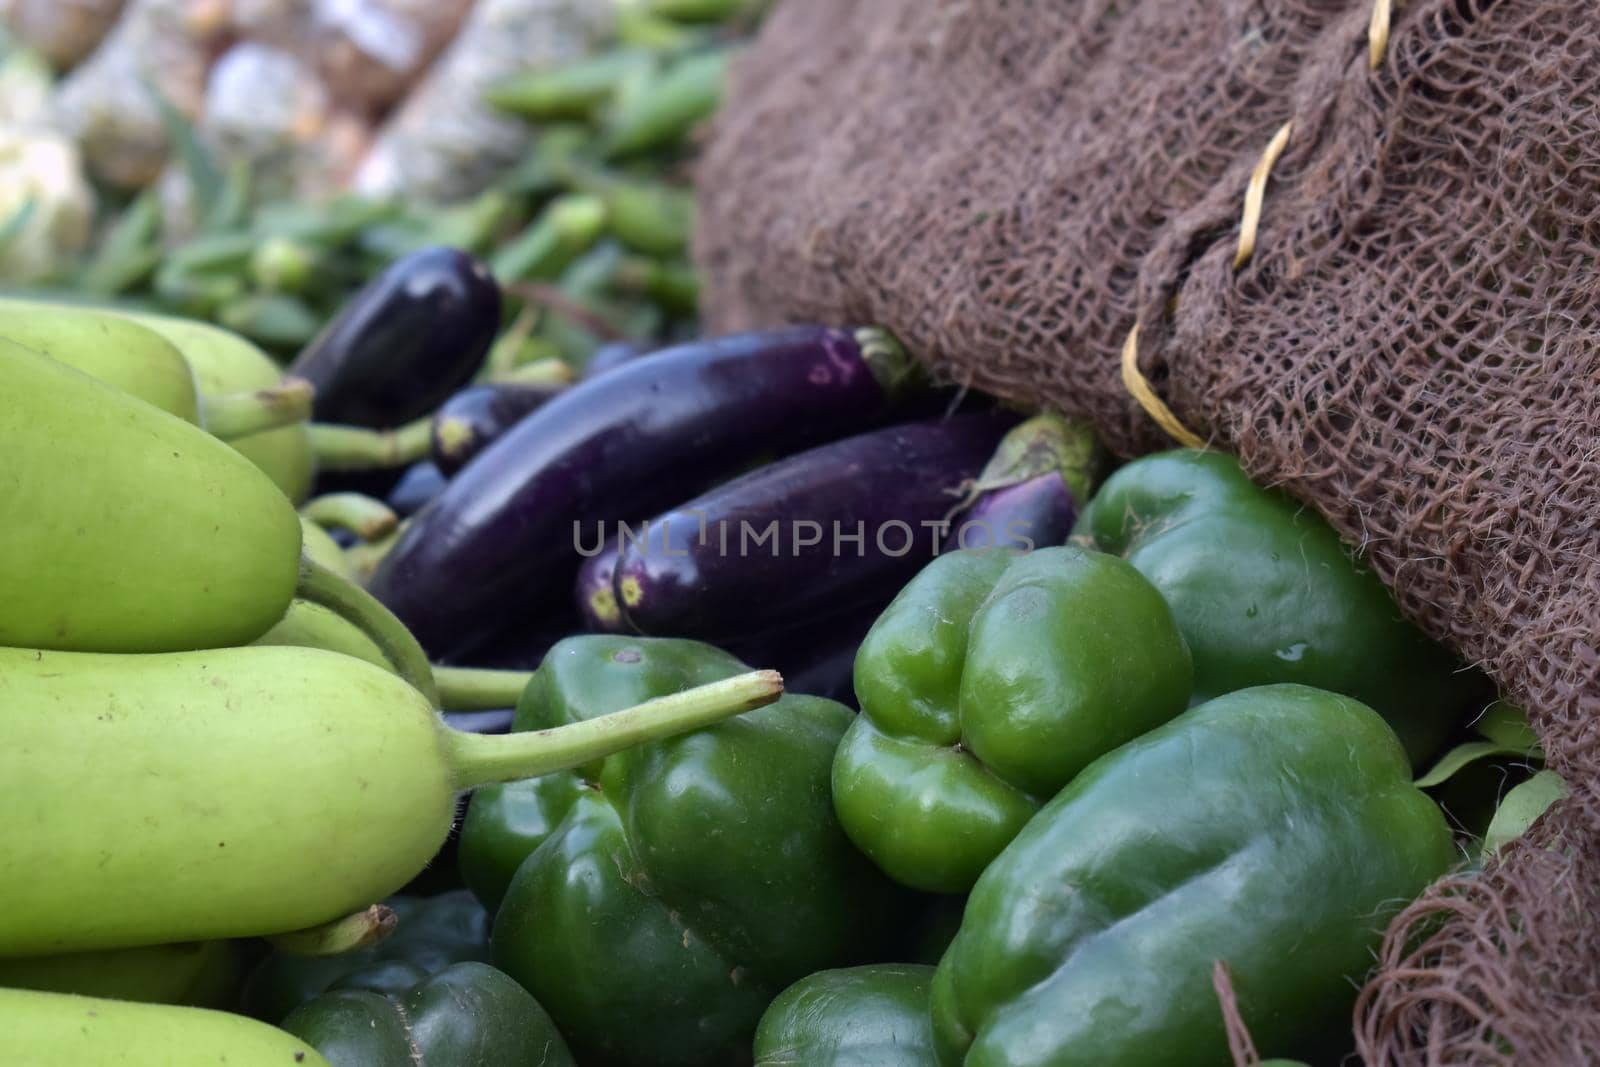 View of assorted vegetables displayed in a market place by tabishere